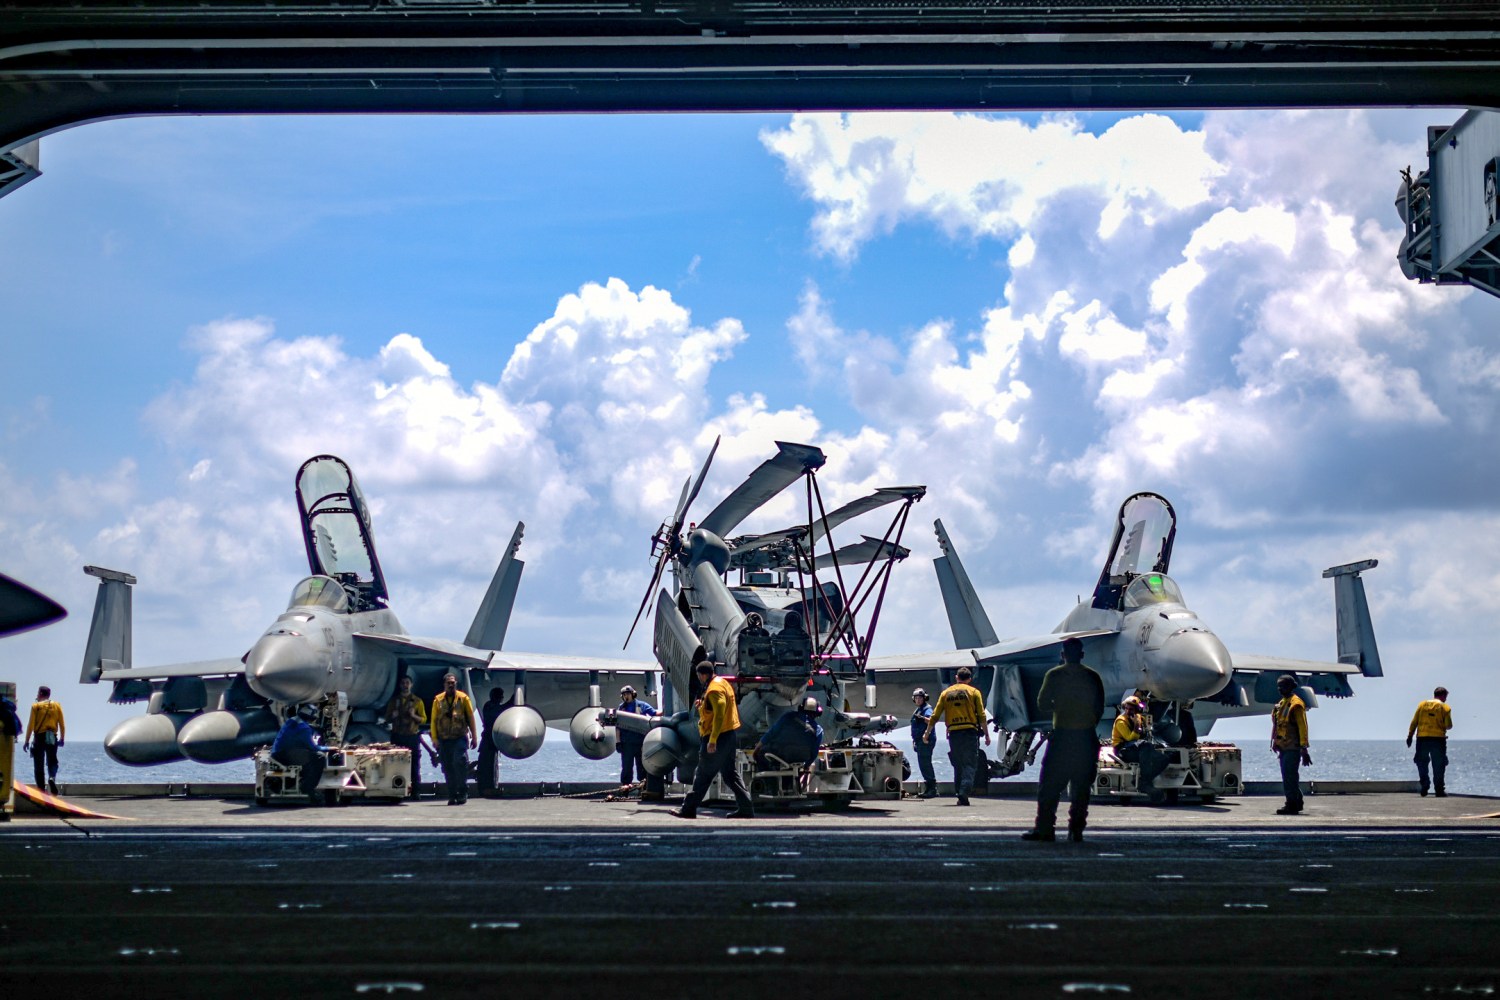 U.S. Navy sailors move aircraft from an elevator into the hangar bay of the aircraft carrier USS Theodore Roosevelt in the South China Sea April 8, 2018. Picture taken April 8, 2018. U.S. Navy/Mass Communication Specialist Seaman Michael Hogan/Handout via REUTERS.  ATTENTION EDITORS - THIS IMAGE WAS PROVIDED BY A THIRD PARTY - RC19F1104180